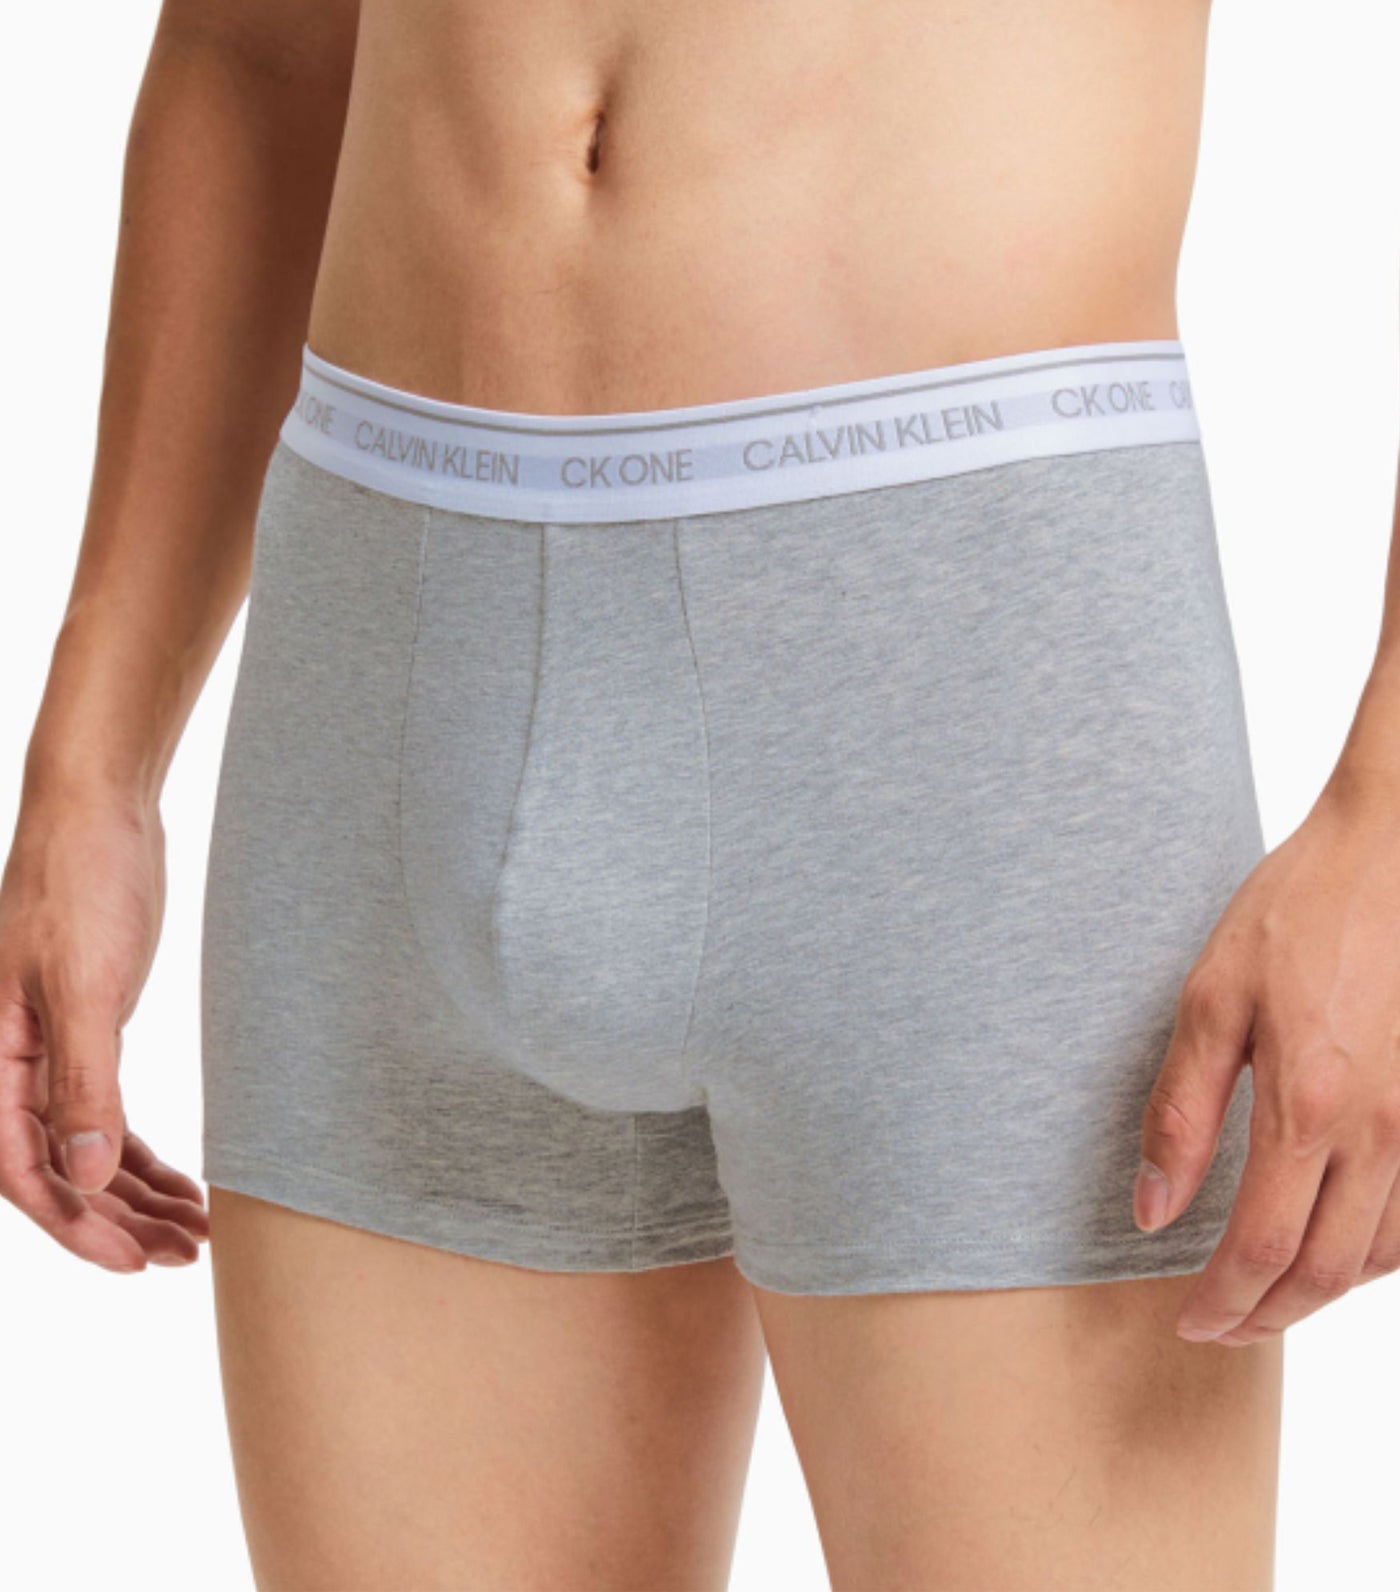 CK One Cotton Trunk Gray